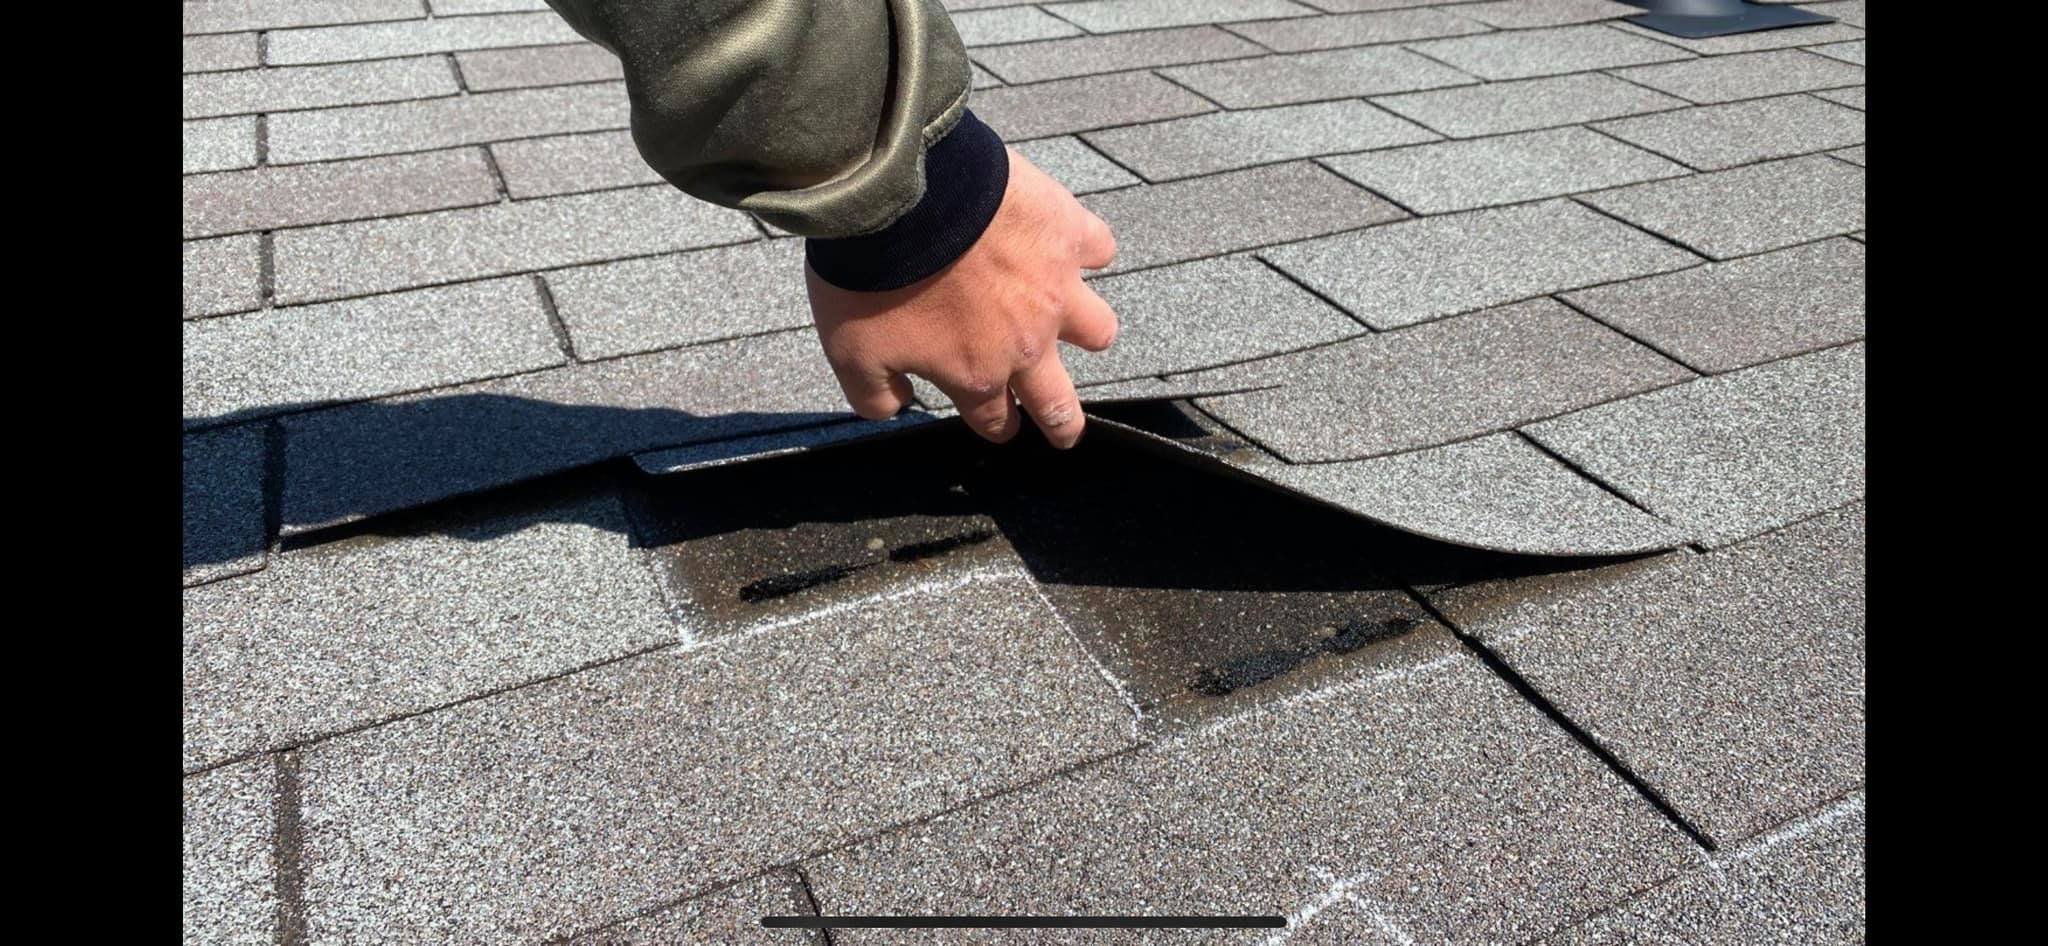 all-american-roofing-free-roof-inspection-storm-damage-water-leak-restoration.jpeg